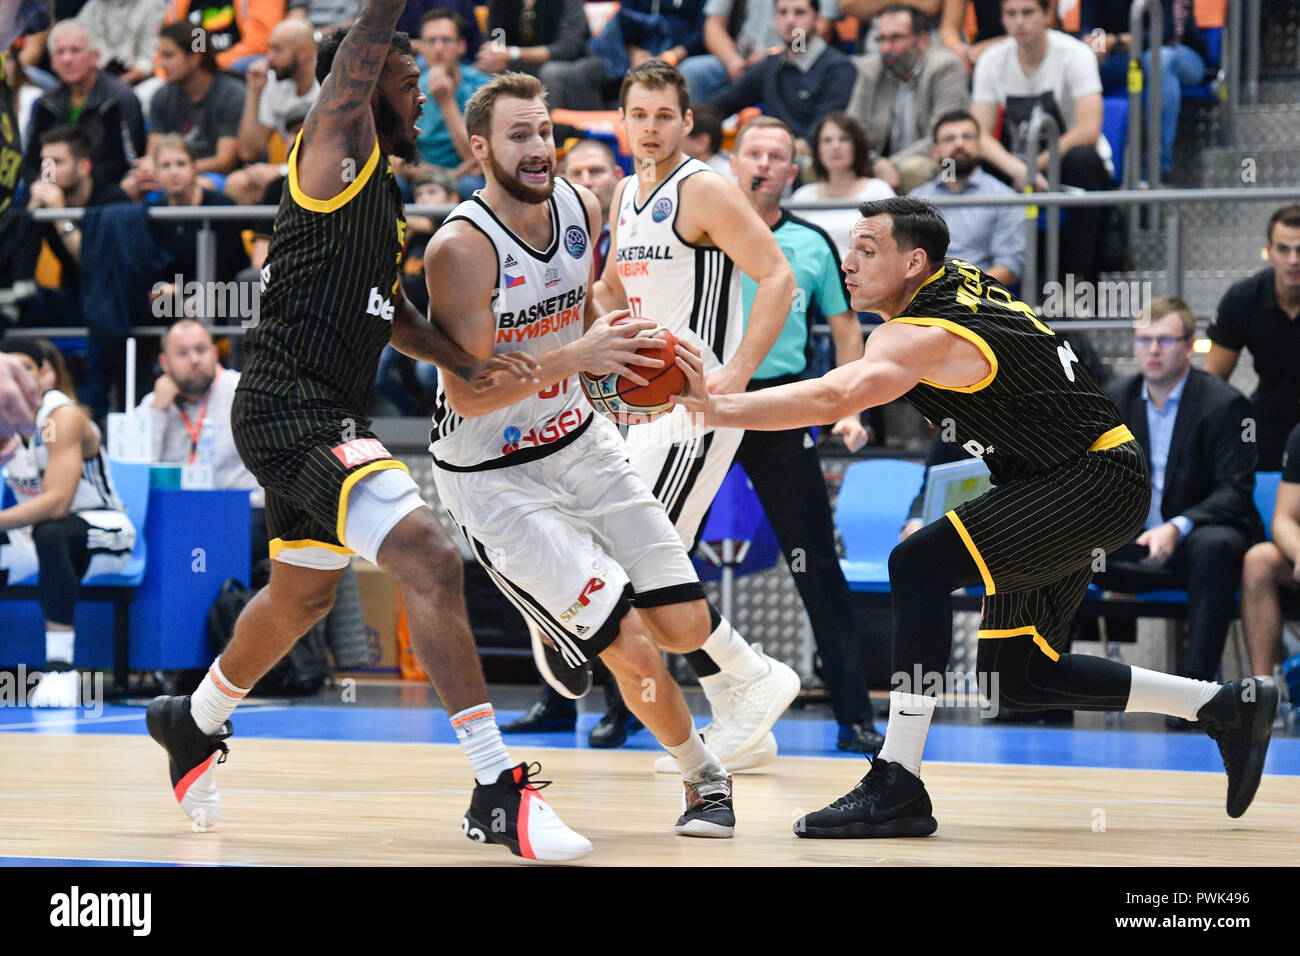 (L-R) Xavier Rathan-Mayes of AEK, Martin Kriz of Nymburk and Jonas Maciulis of AEK in action during the Men's Basketball Champions League 2nd round group C match CEZ Basketball Nymburk vs AEK Athens in Prague, Czech Republic, October 16, 2018. (CTK Photo/Michal Kamaryt) Stock Photo